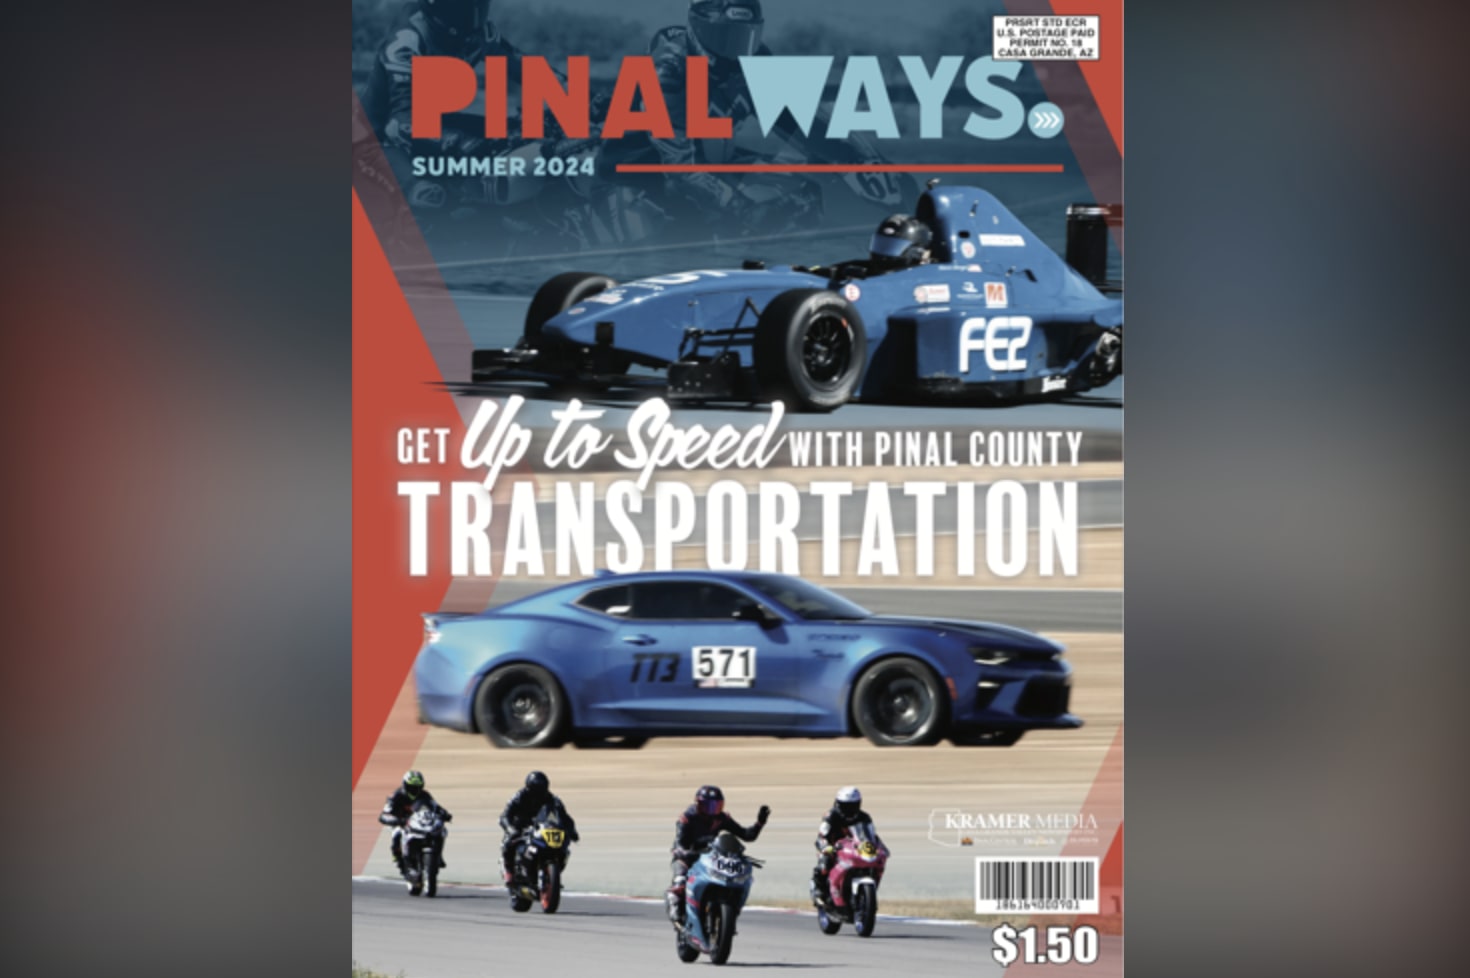 Latest Pinal Ways issue explores automotive industry, transportation in Pinal